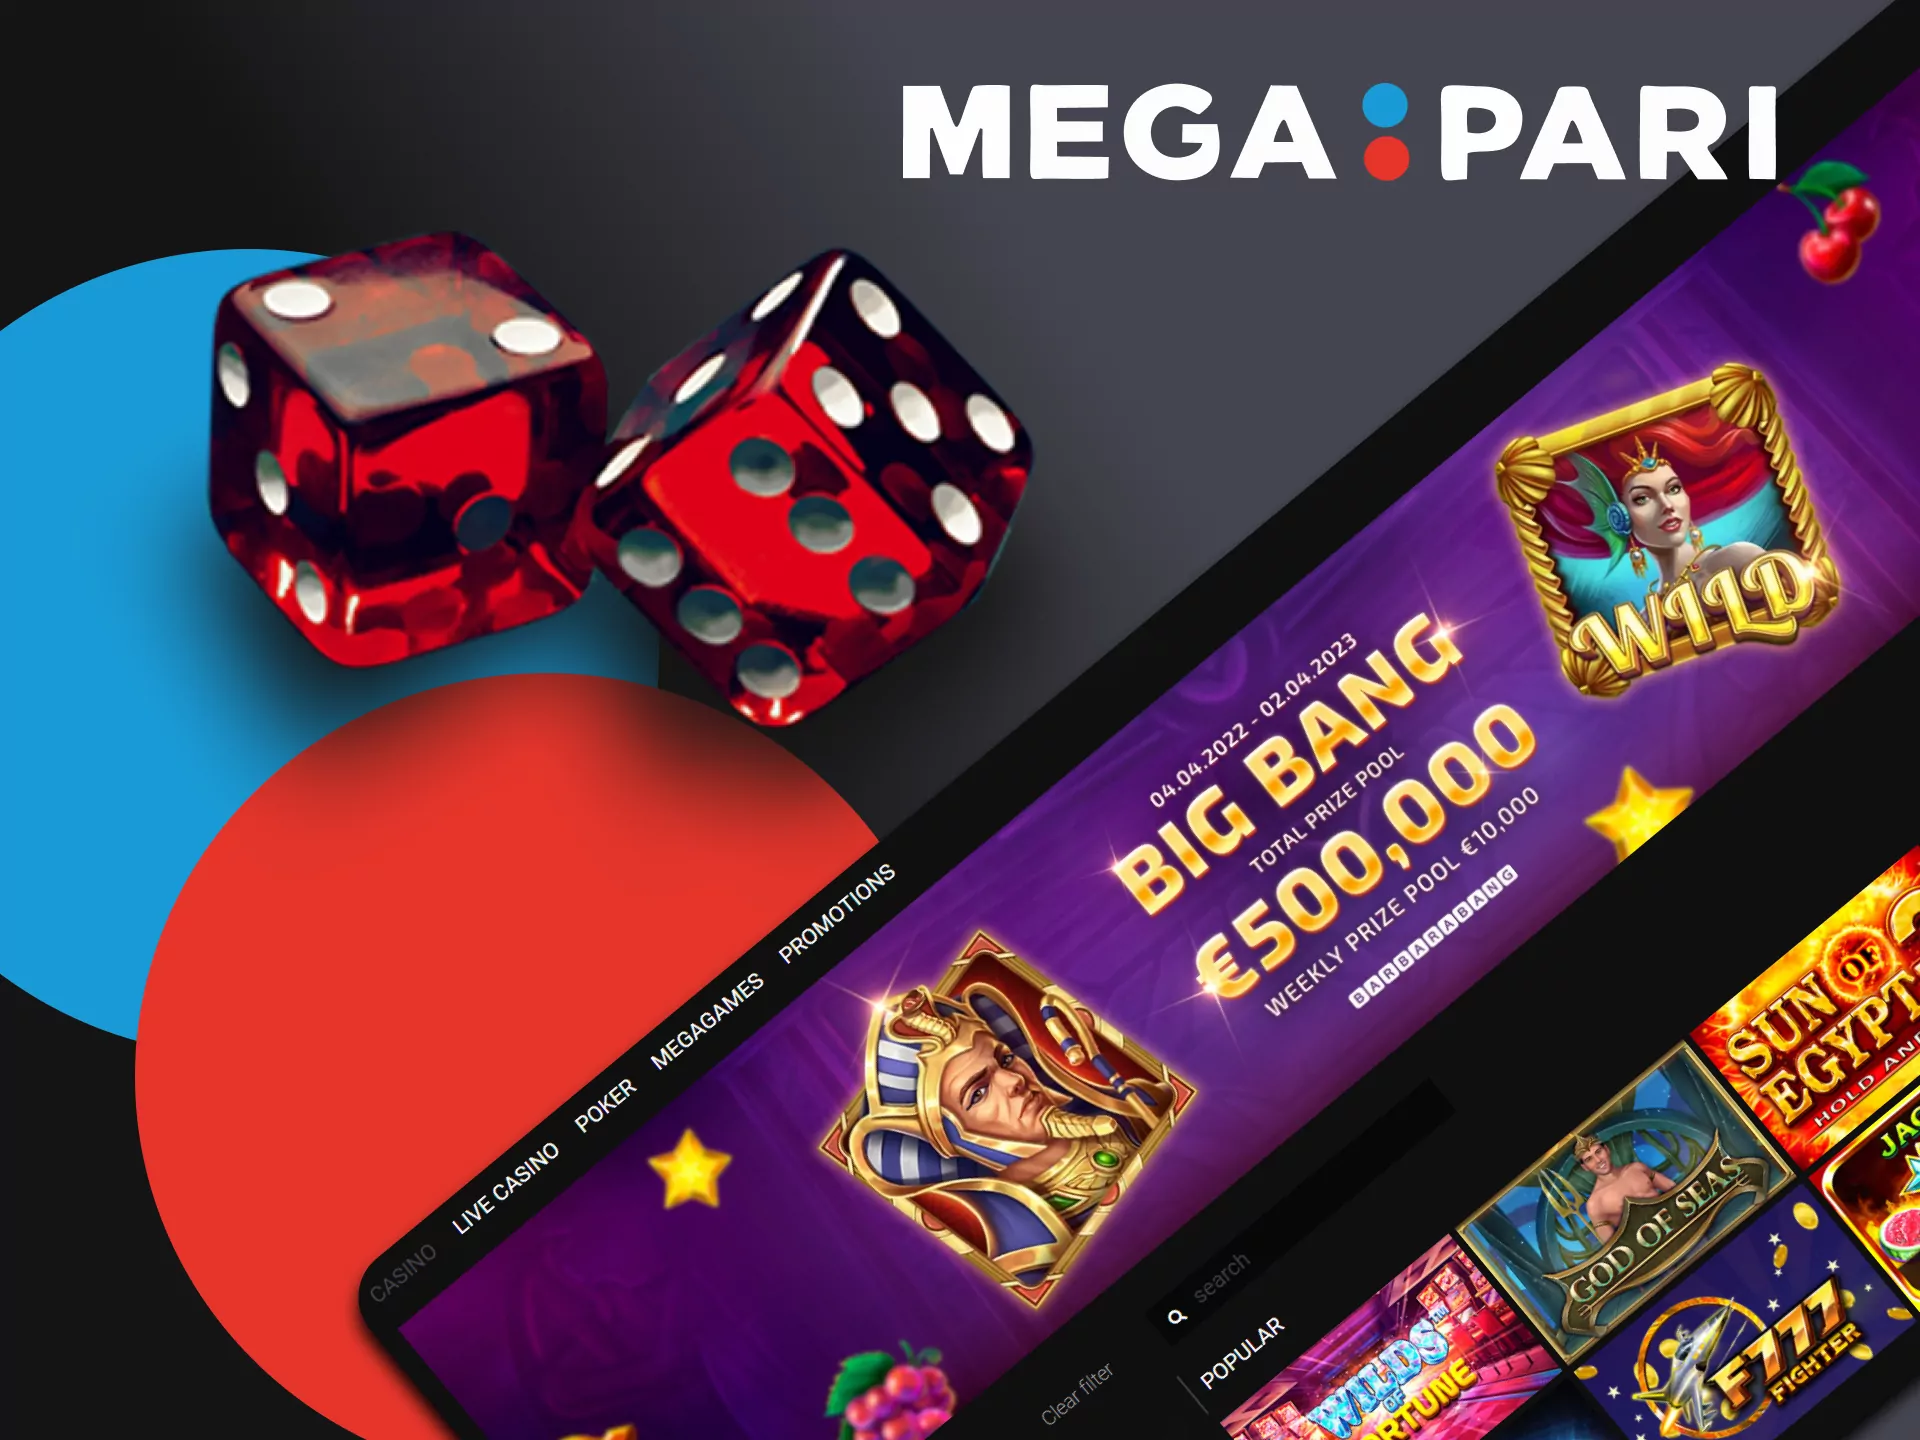 Check the list of the best sides and achievements of Megapari casino.